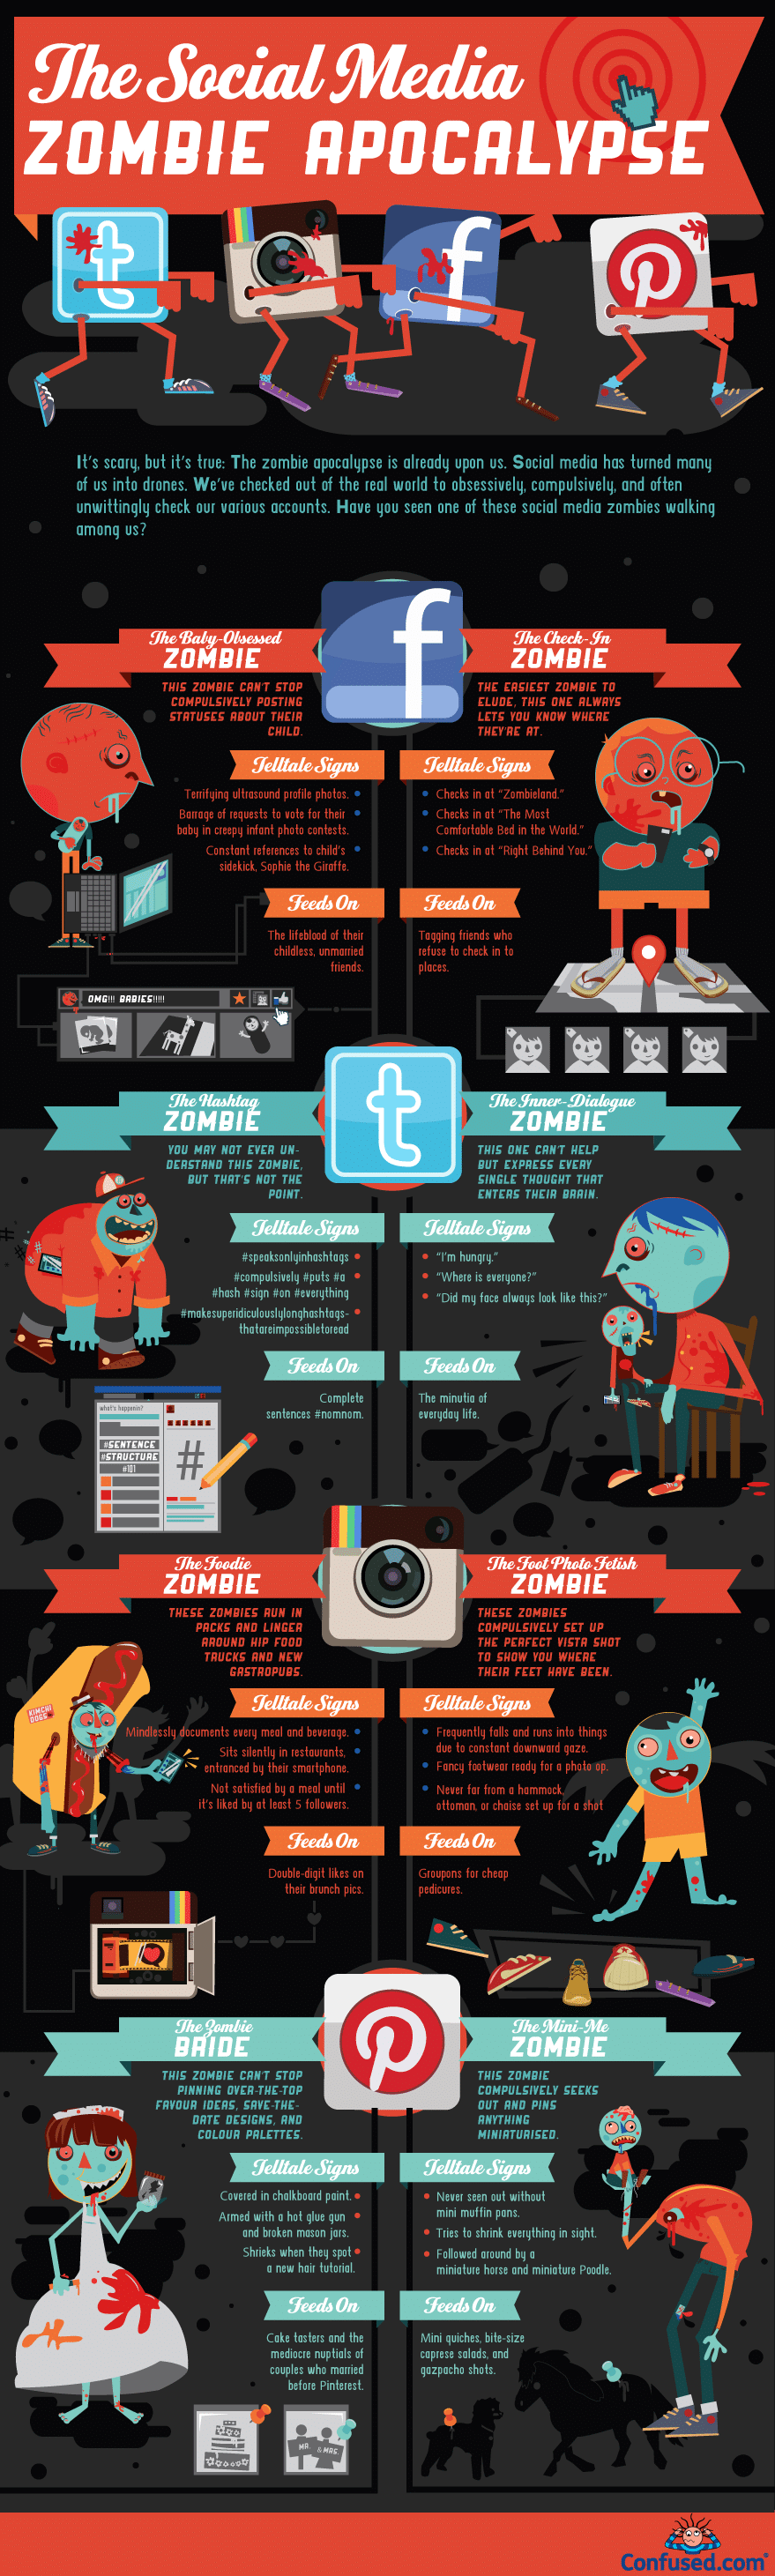 Have You Become A Social Media Zombie? [Infographic]